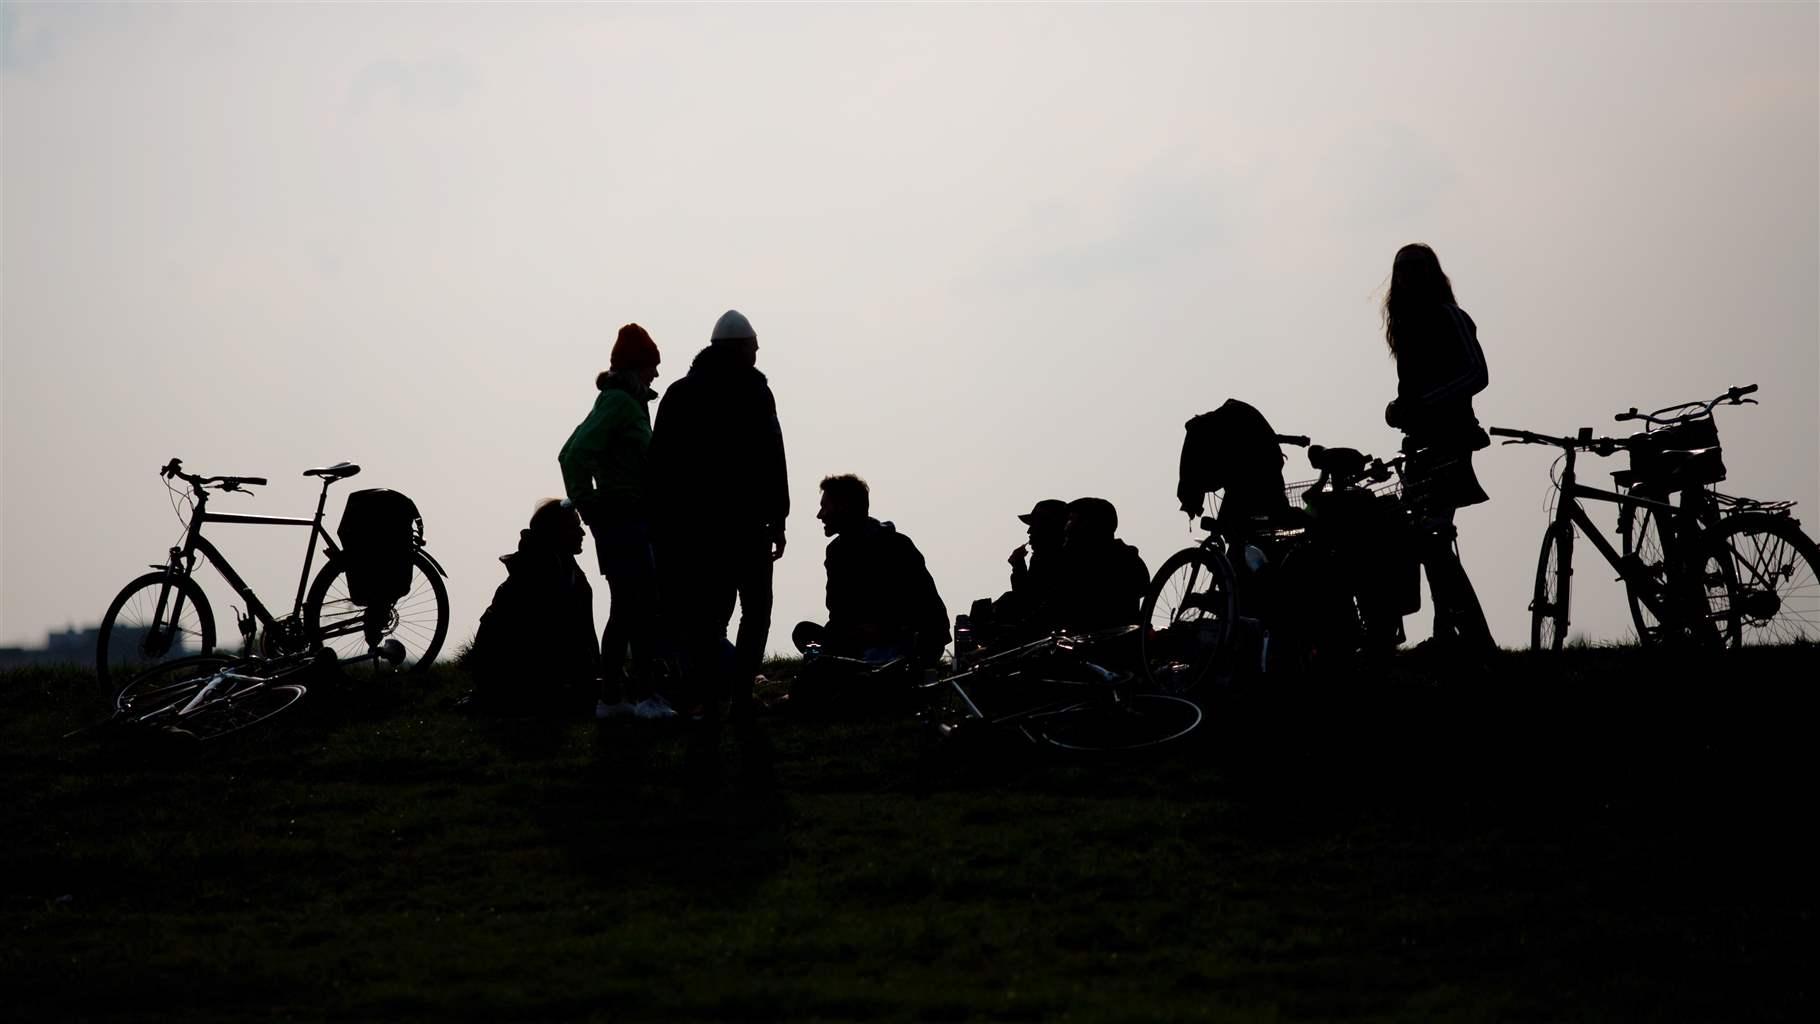 A group of teenagers gather in a park with bikes, their silhouettes in high contrast to the cloudy sky behind them. 